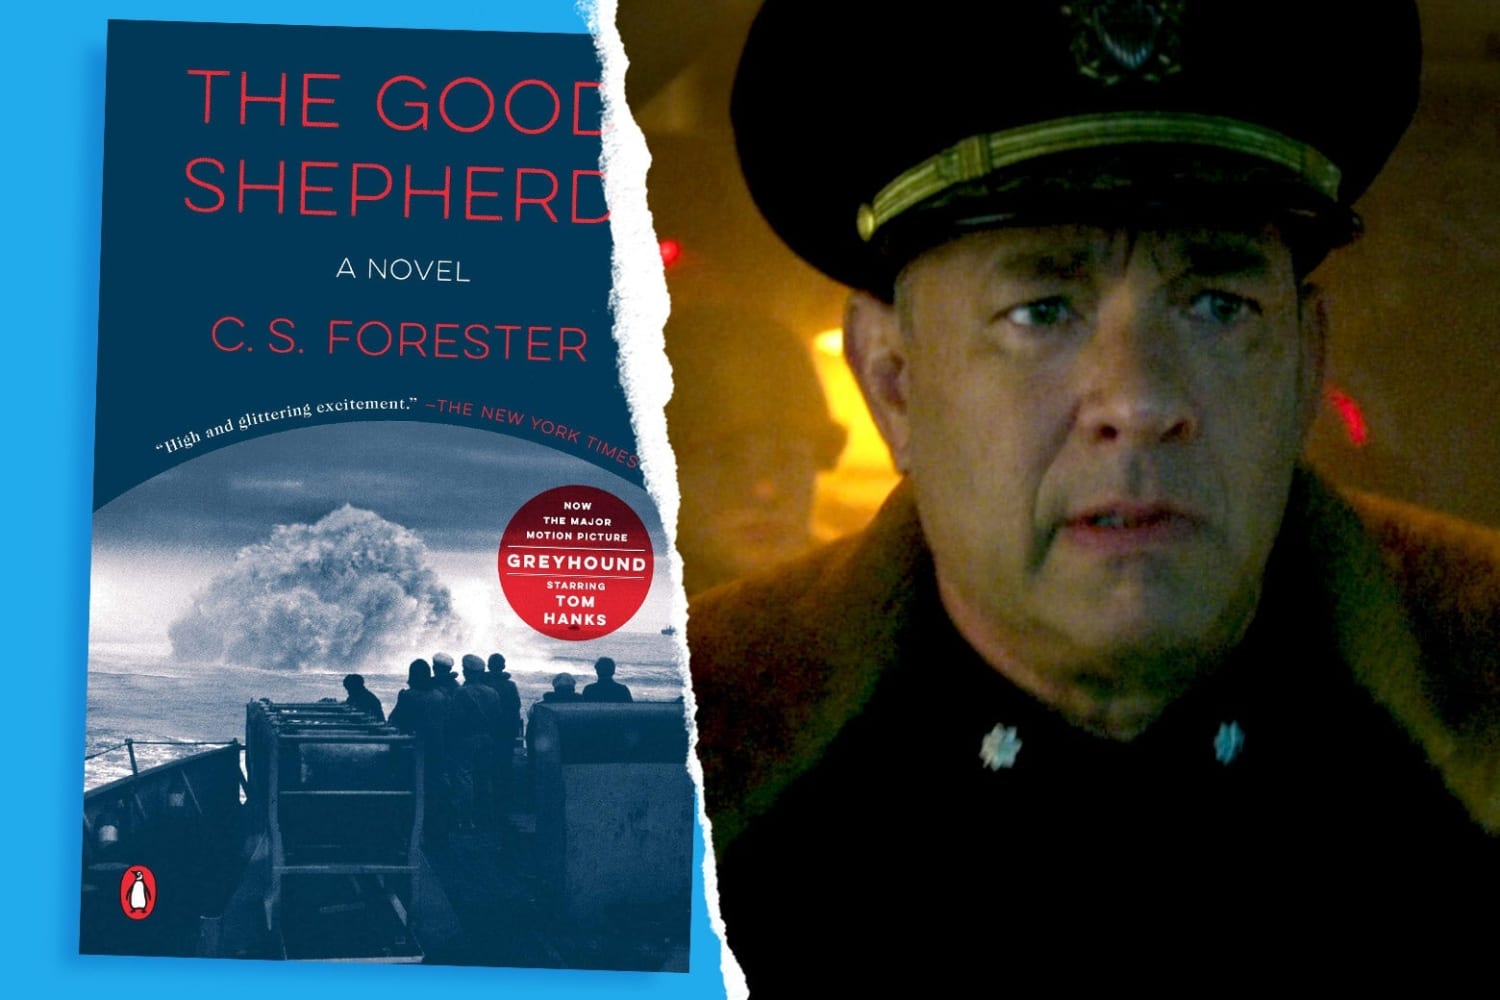 How Does Greyhound Compare to the World War II Novel by C.S. Forester?